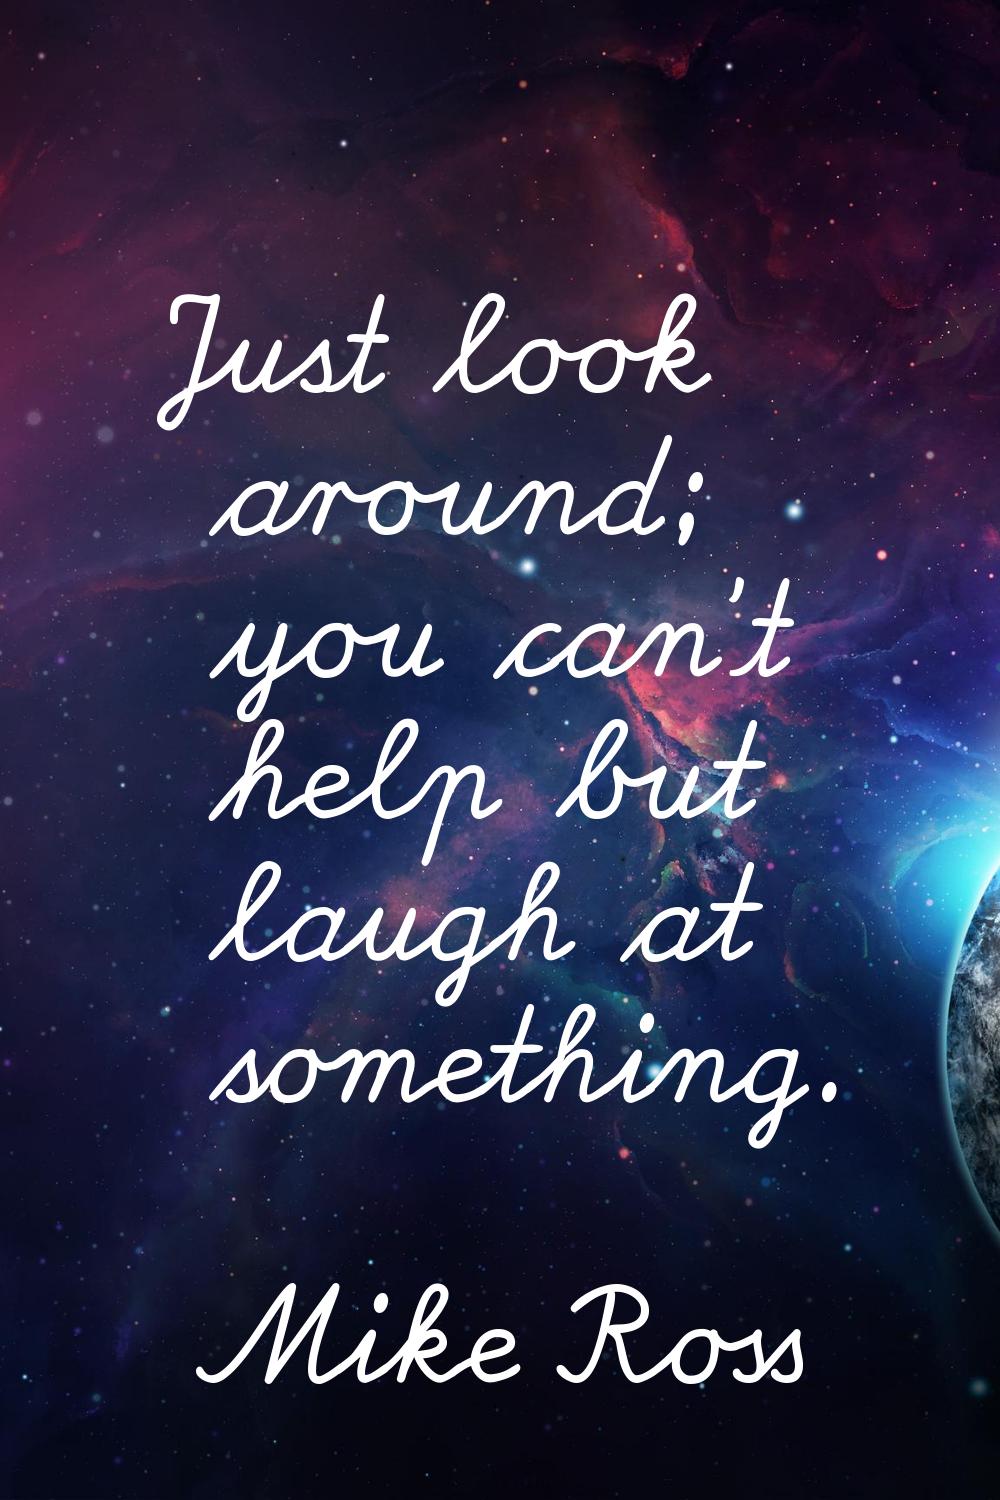 Just look around; you can't help but laugh at something.